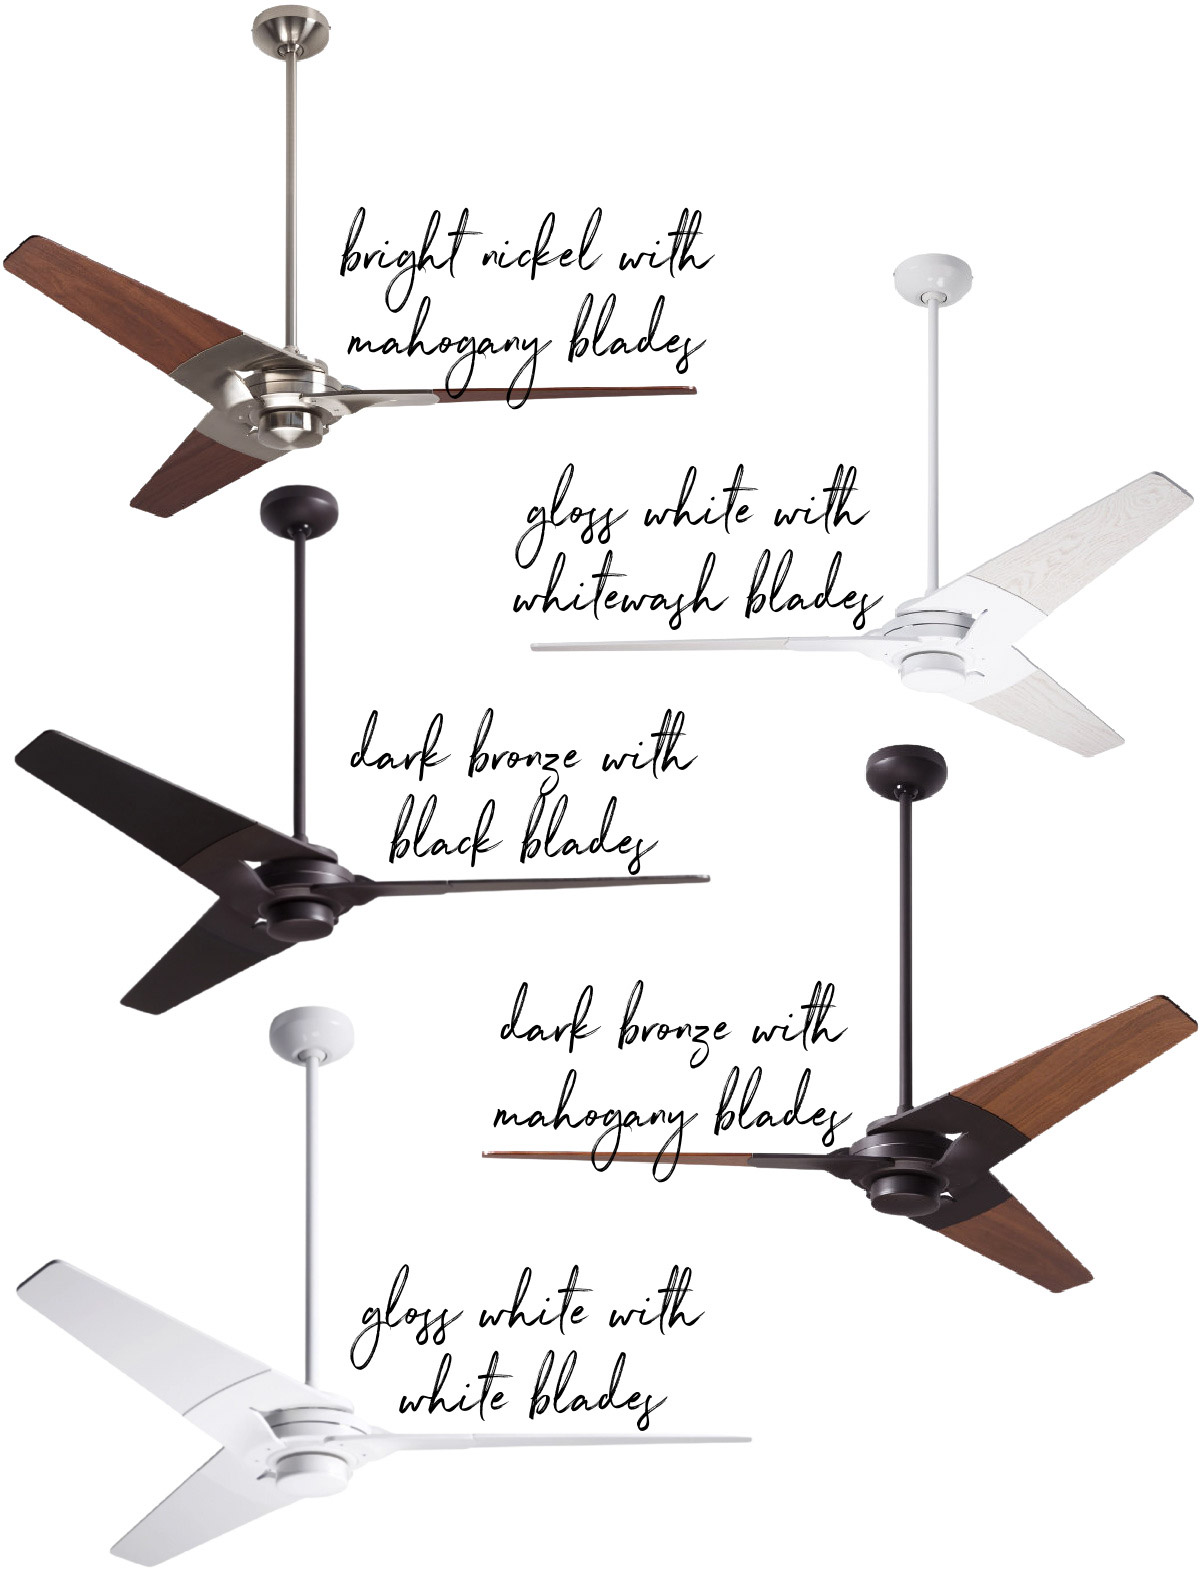 Gorgeous bedroom ceiling fan - mix and match for industrial, mid-century modern, or other design!